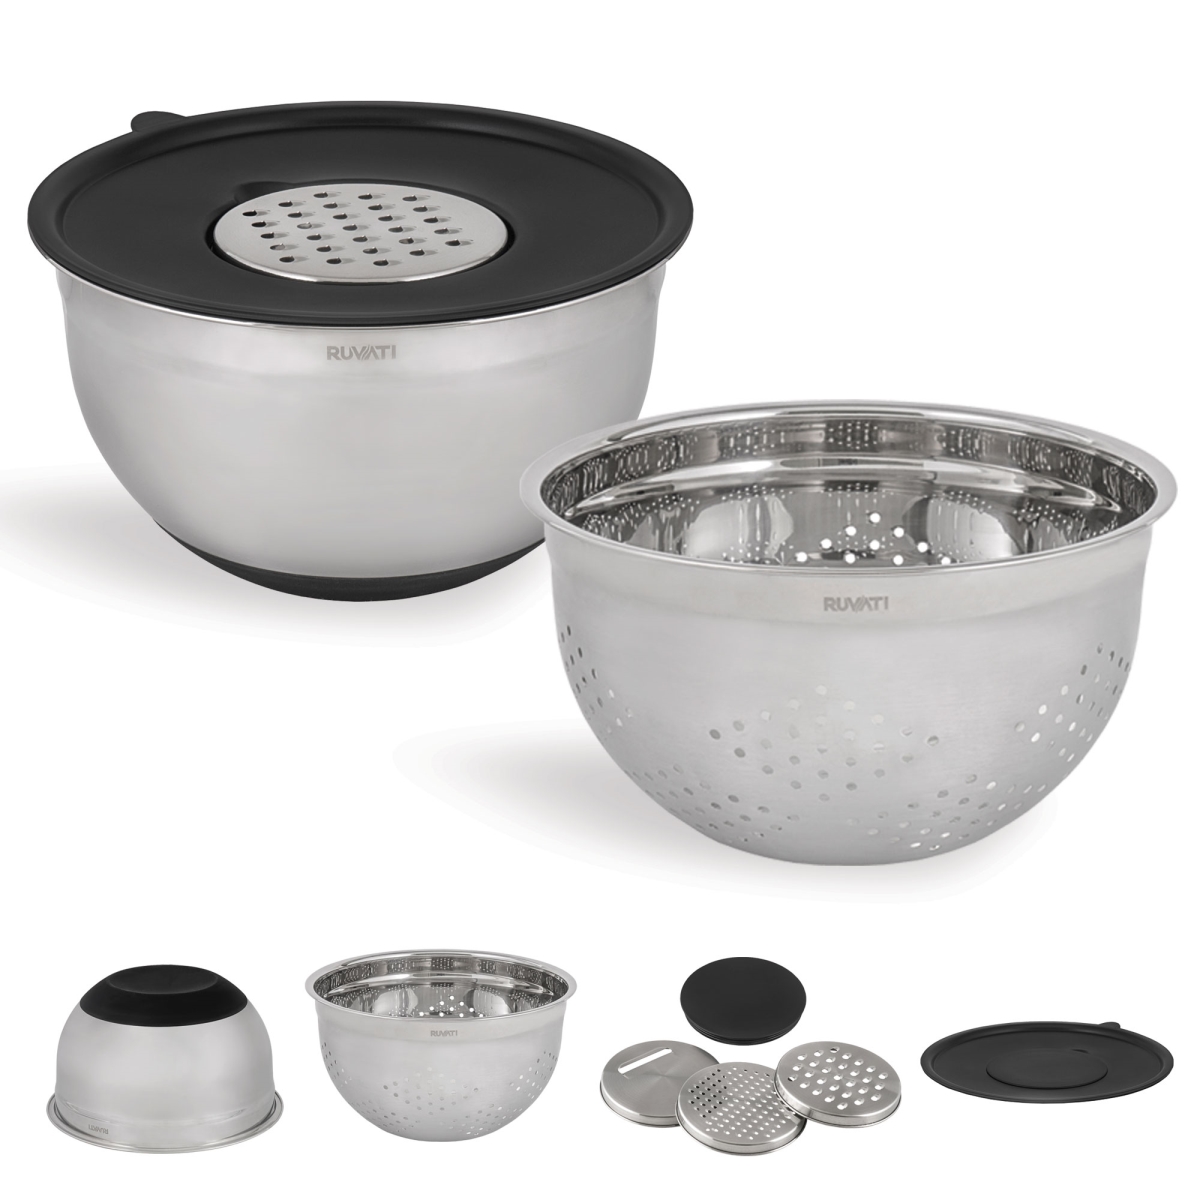 Picture of Ruvati USA RVA1255 5 qt. Mixing Bowl & Colander Bowl Set with Grater Attachments - 6 Piece